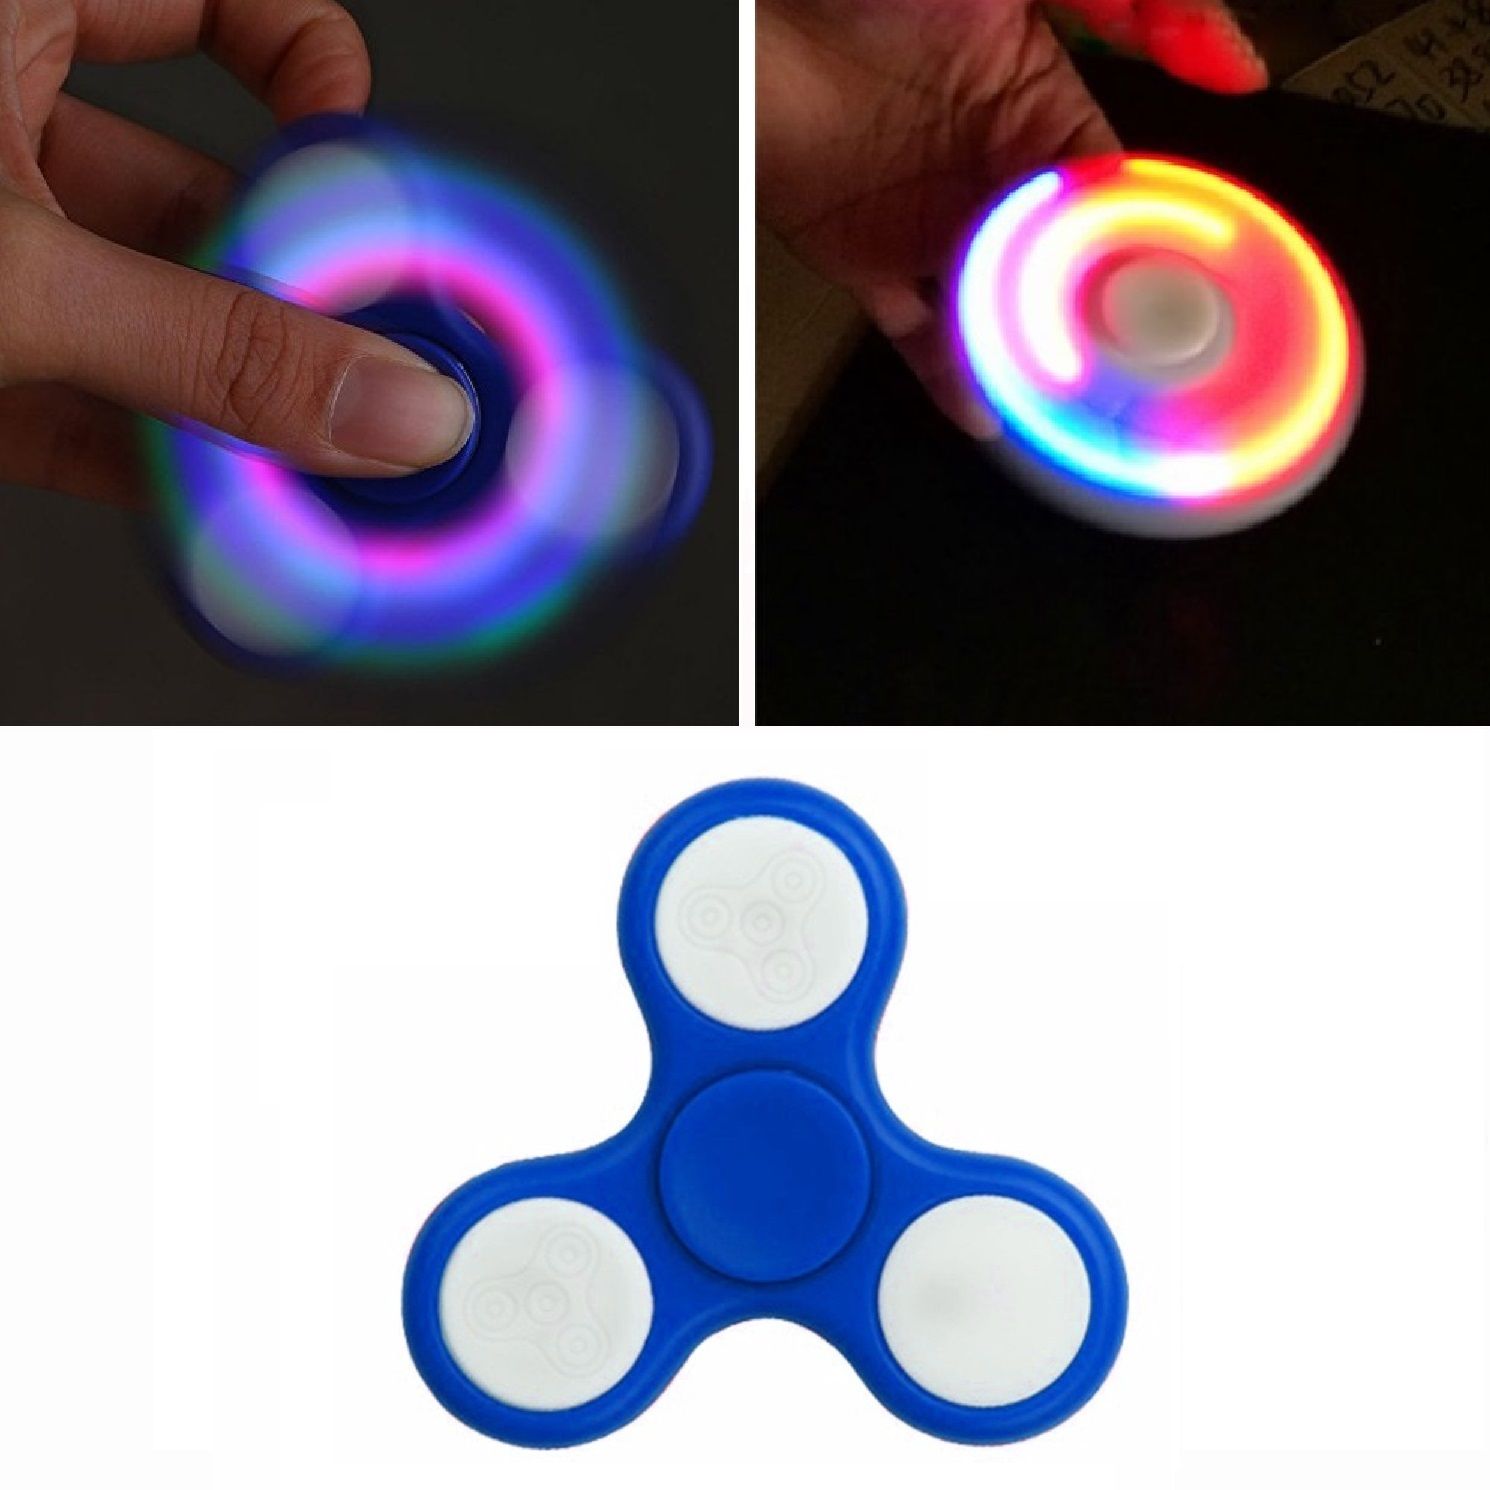 Light Up Color Flashing LED Fidget Spinner Tri-Spinner Hand Spinner Finger Spinner Toy Stress Reducer for Anxiety and Stress Relief - Blue - image 1 of 4